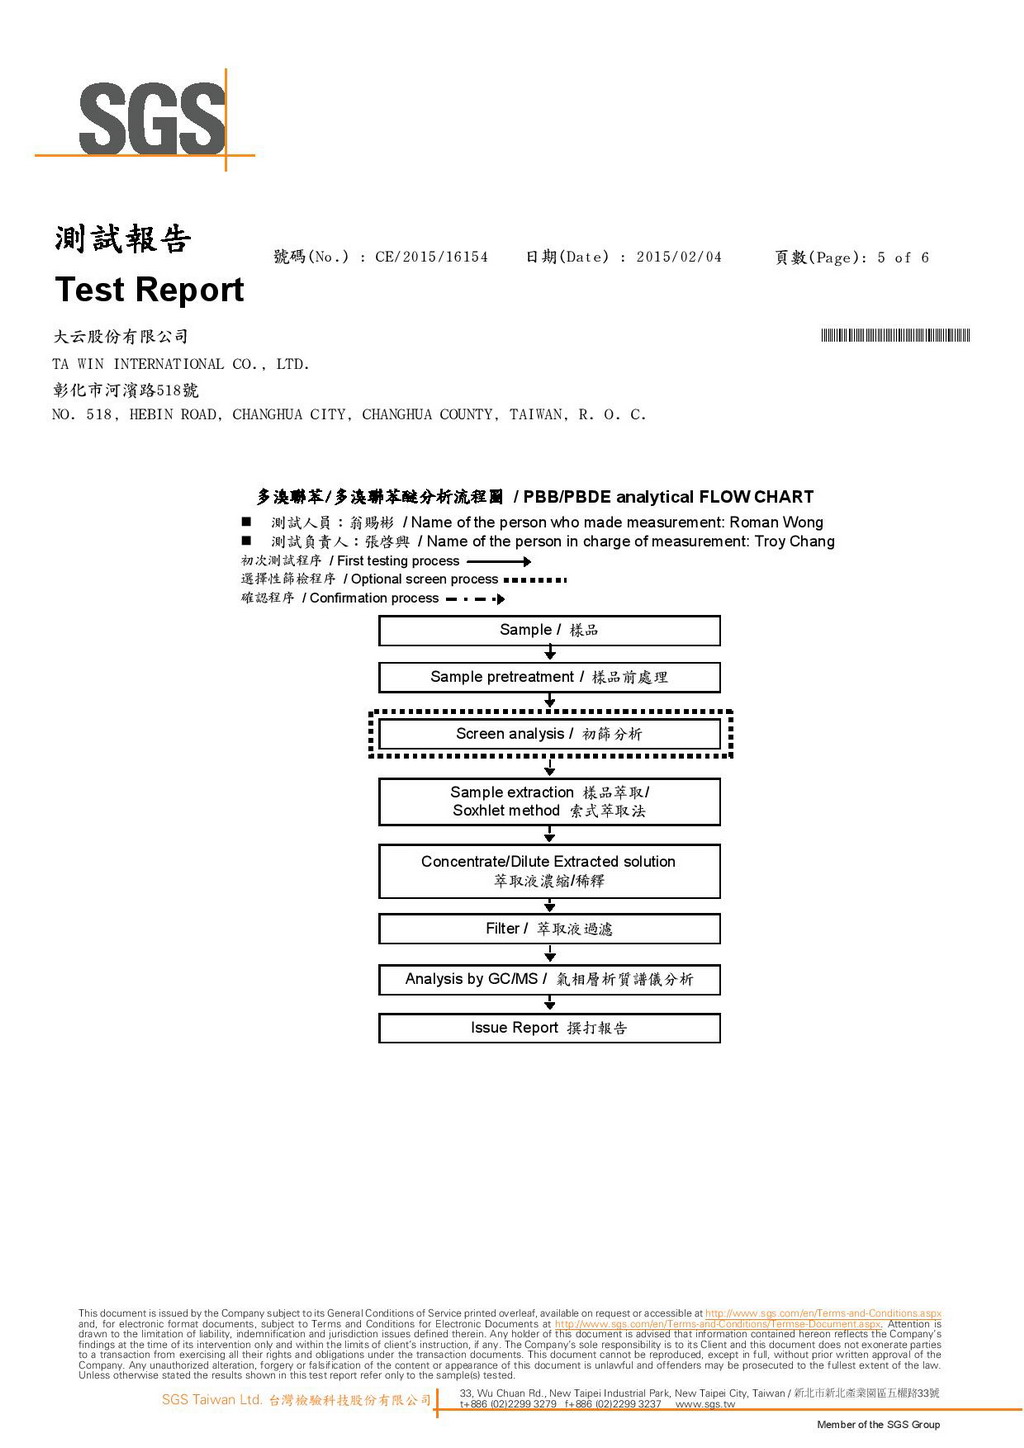 2015.02-The new version of SGS Testing Report for PVC Compound was enclosed.  